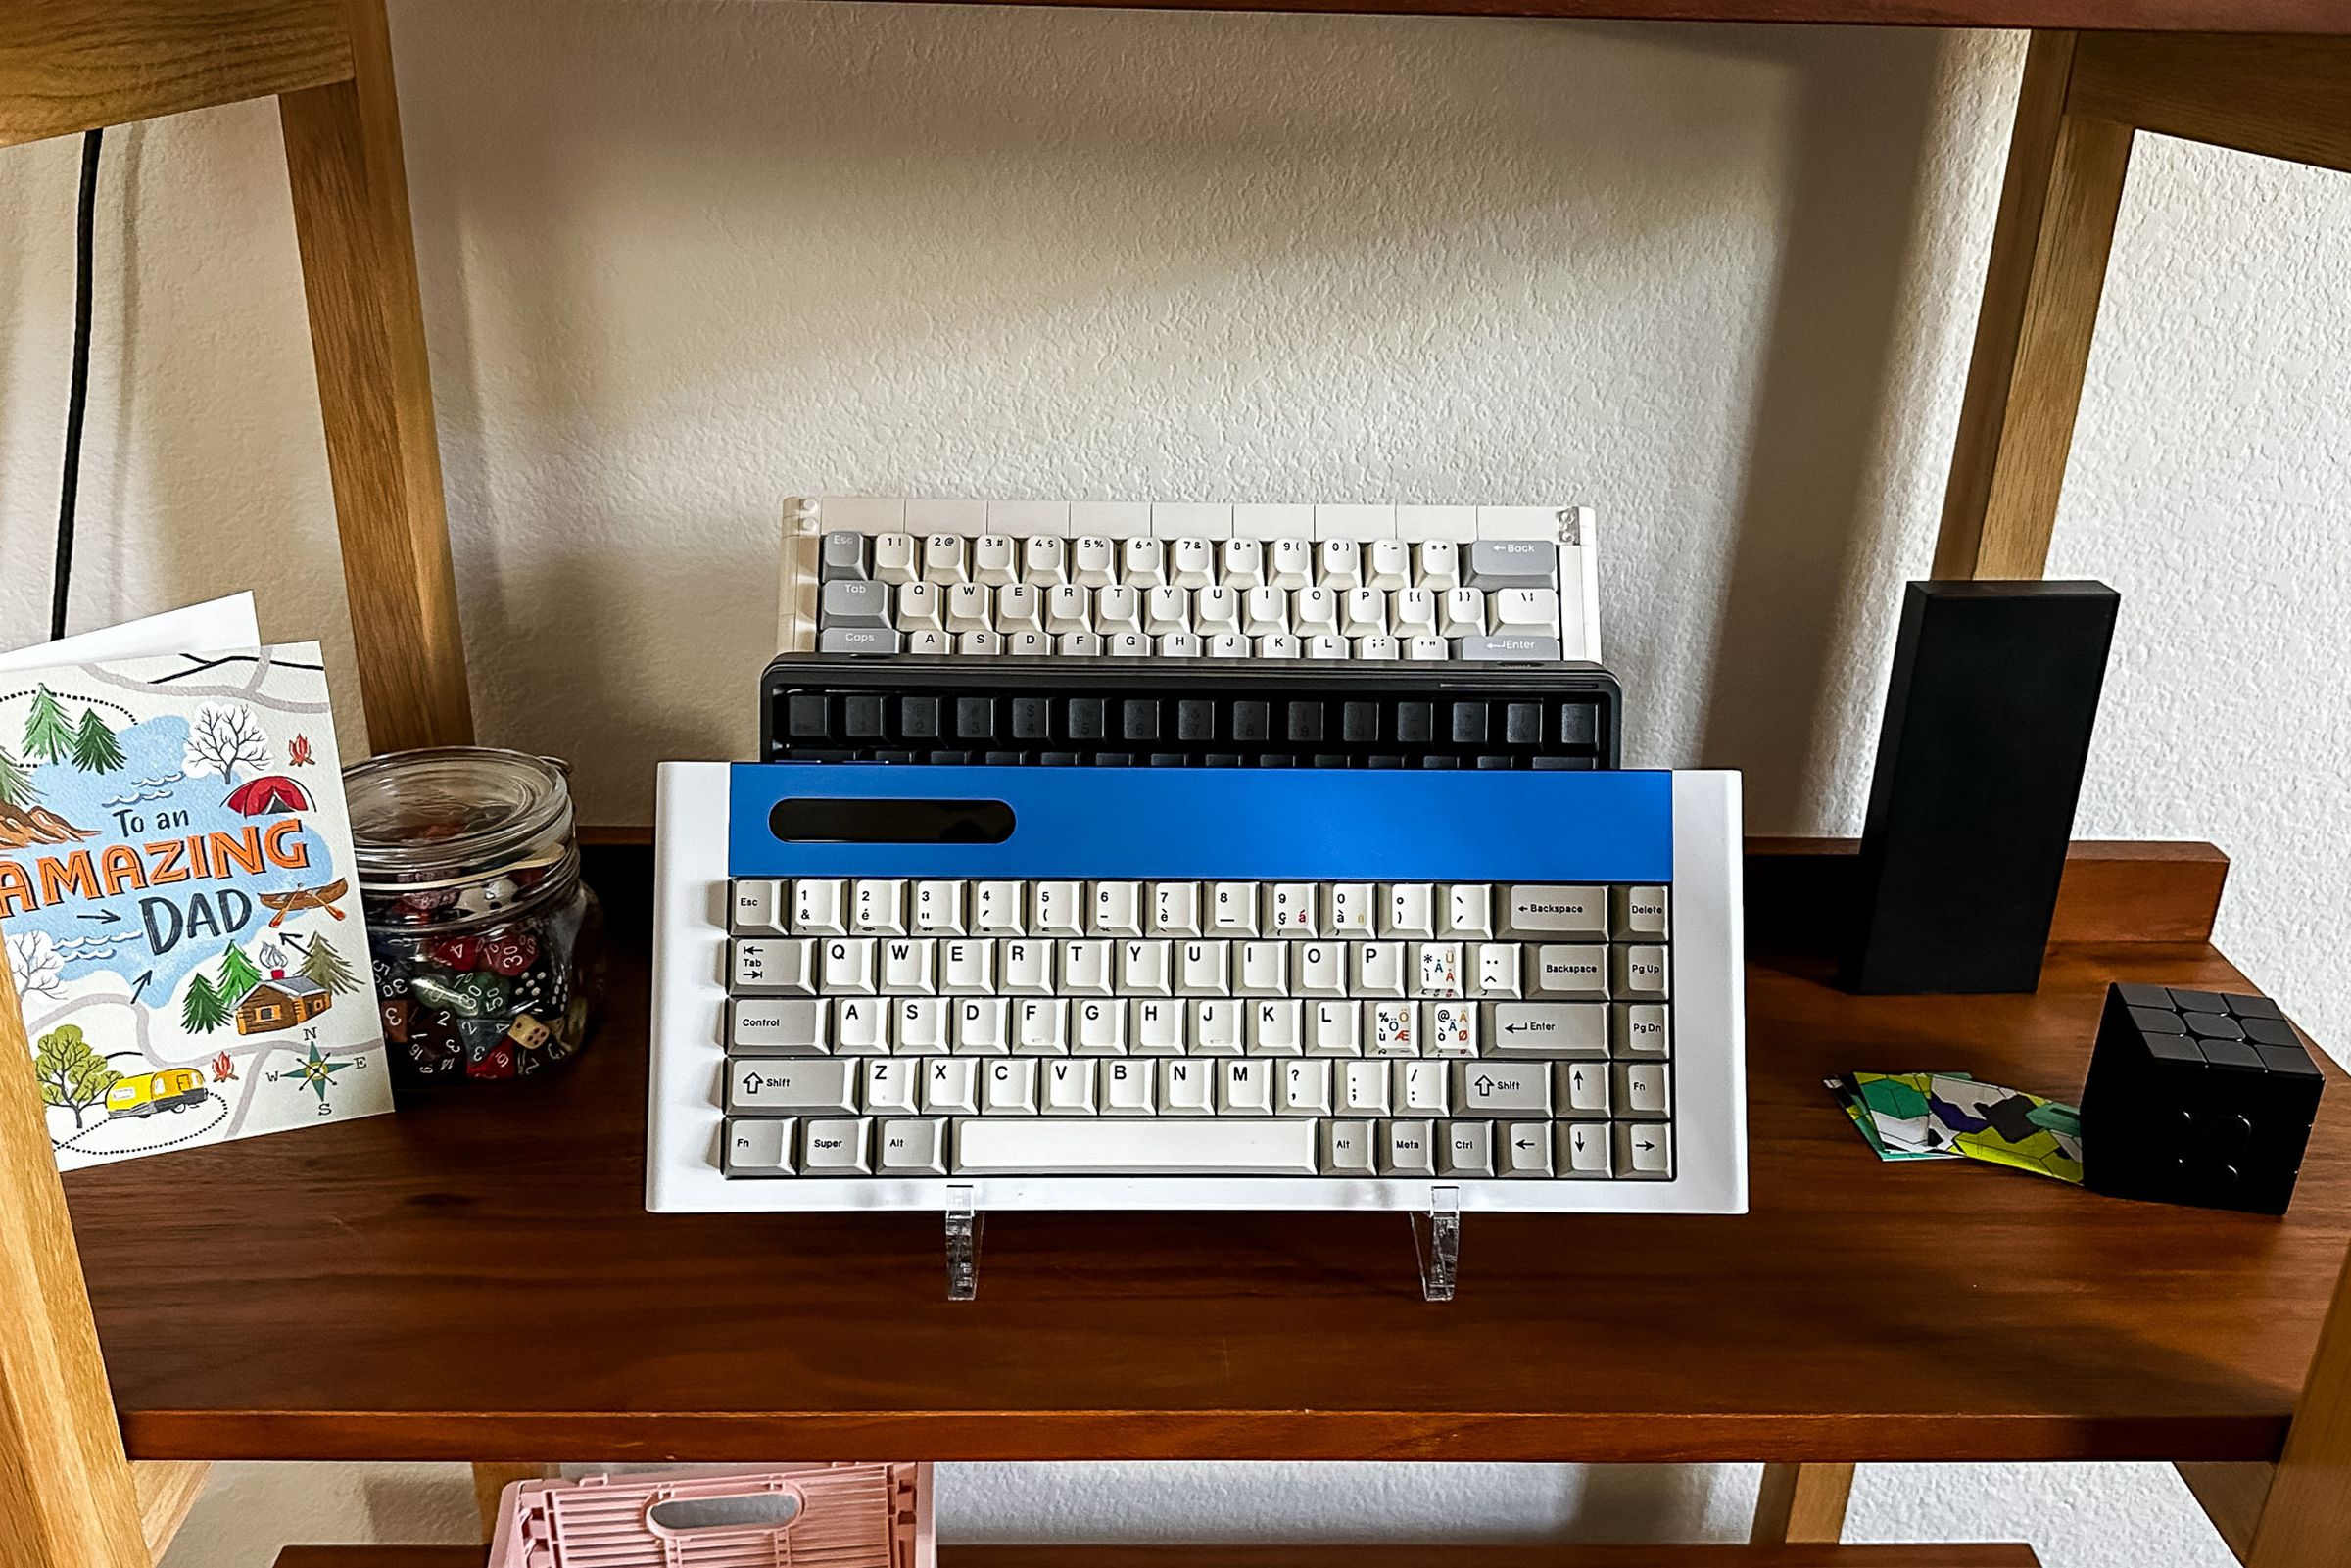 Blue, white and gray keyboard.